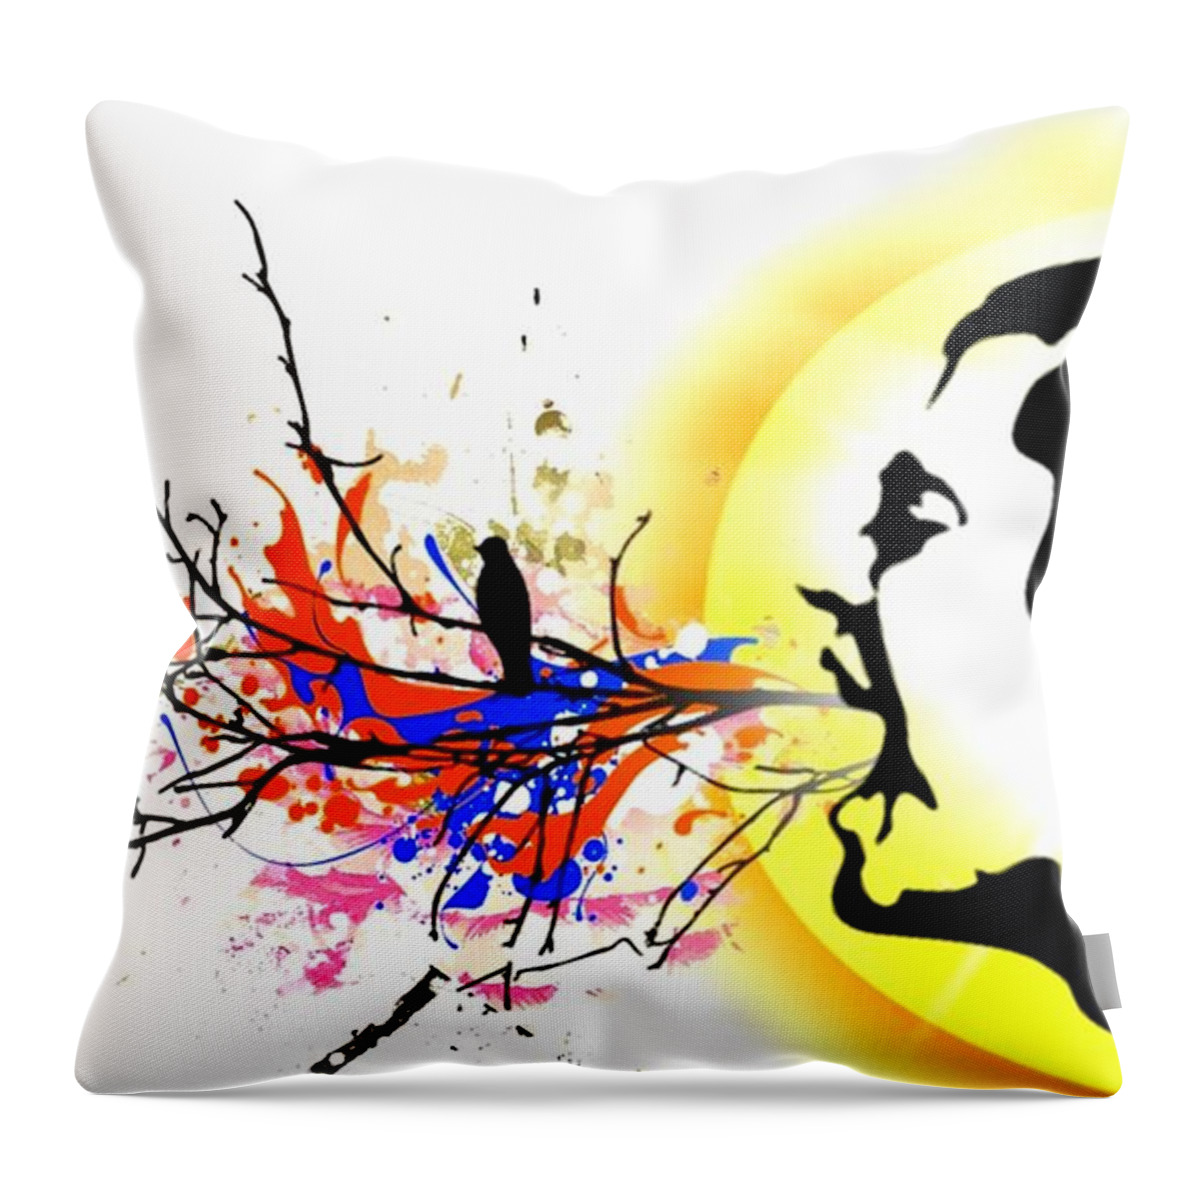 Achieve Happiness Throw Pillow featuring the digital art Happiness Must Be Born Within Us 1 by Paulo Zerbato